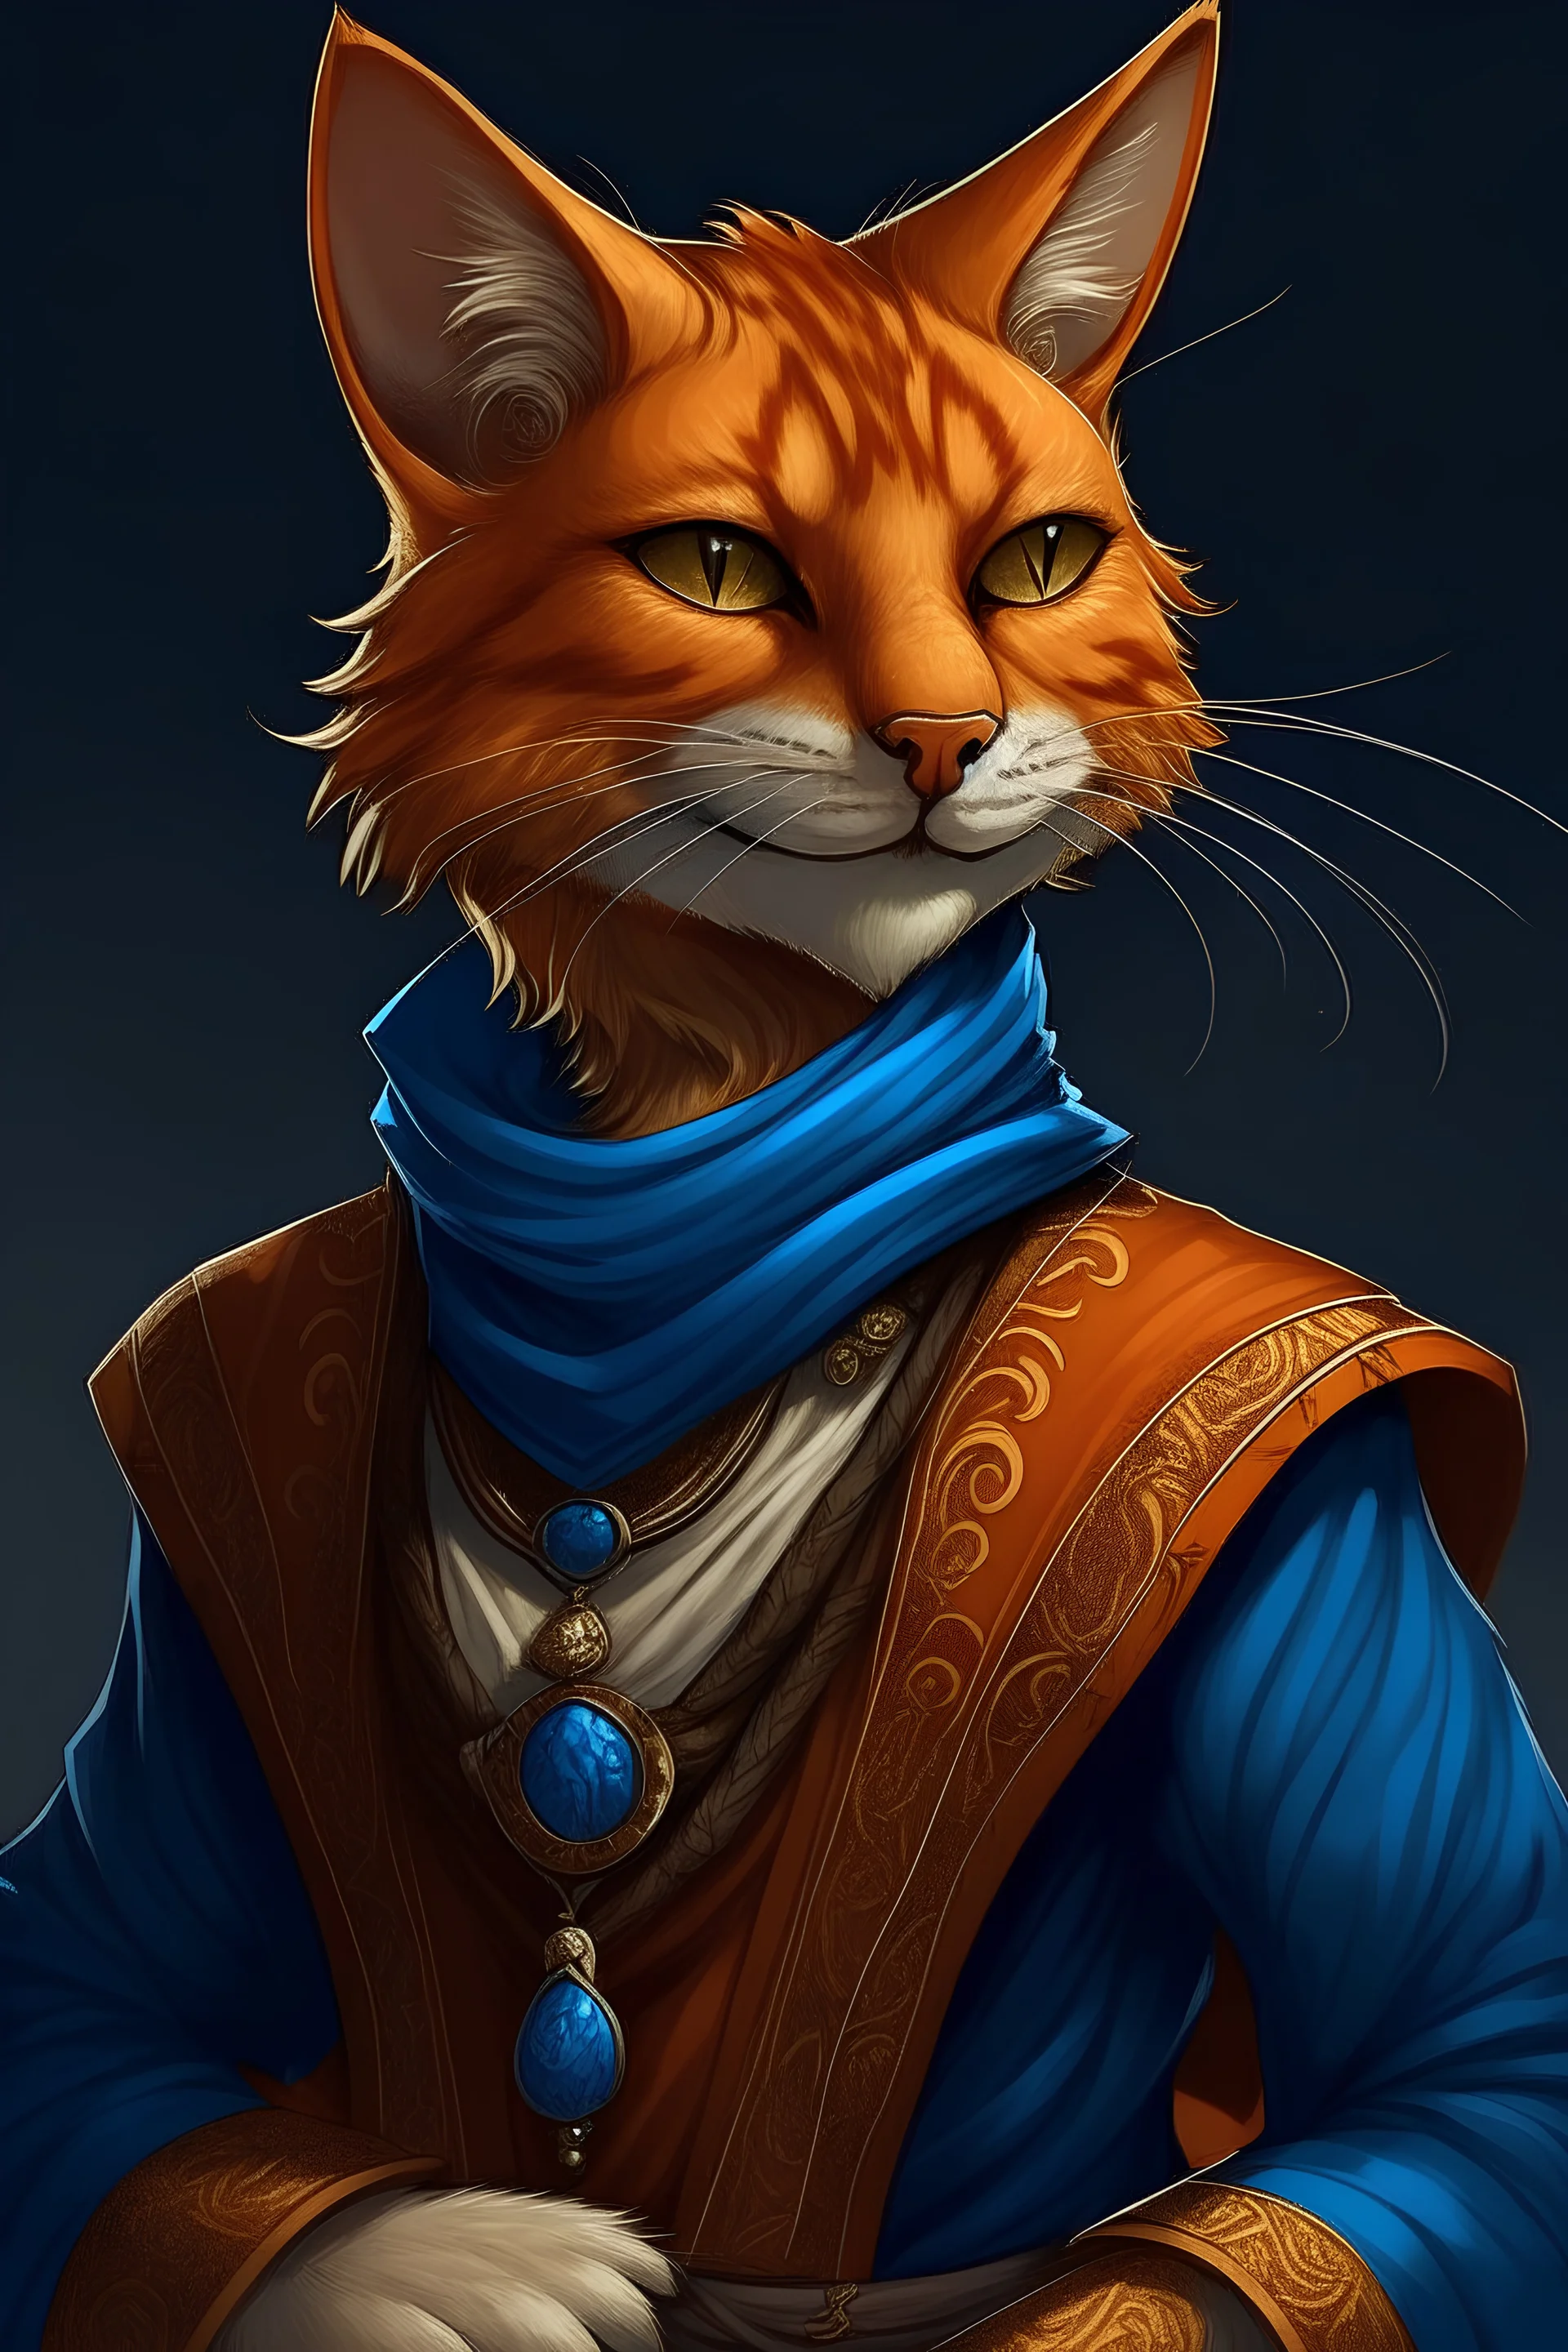 portrait of a Tabaxi female bard in D&D style, orange fur, blue eyes, feline facial features, stance conveying allure, intricate costume design, prohibition era dress,